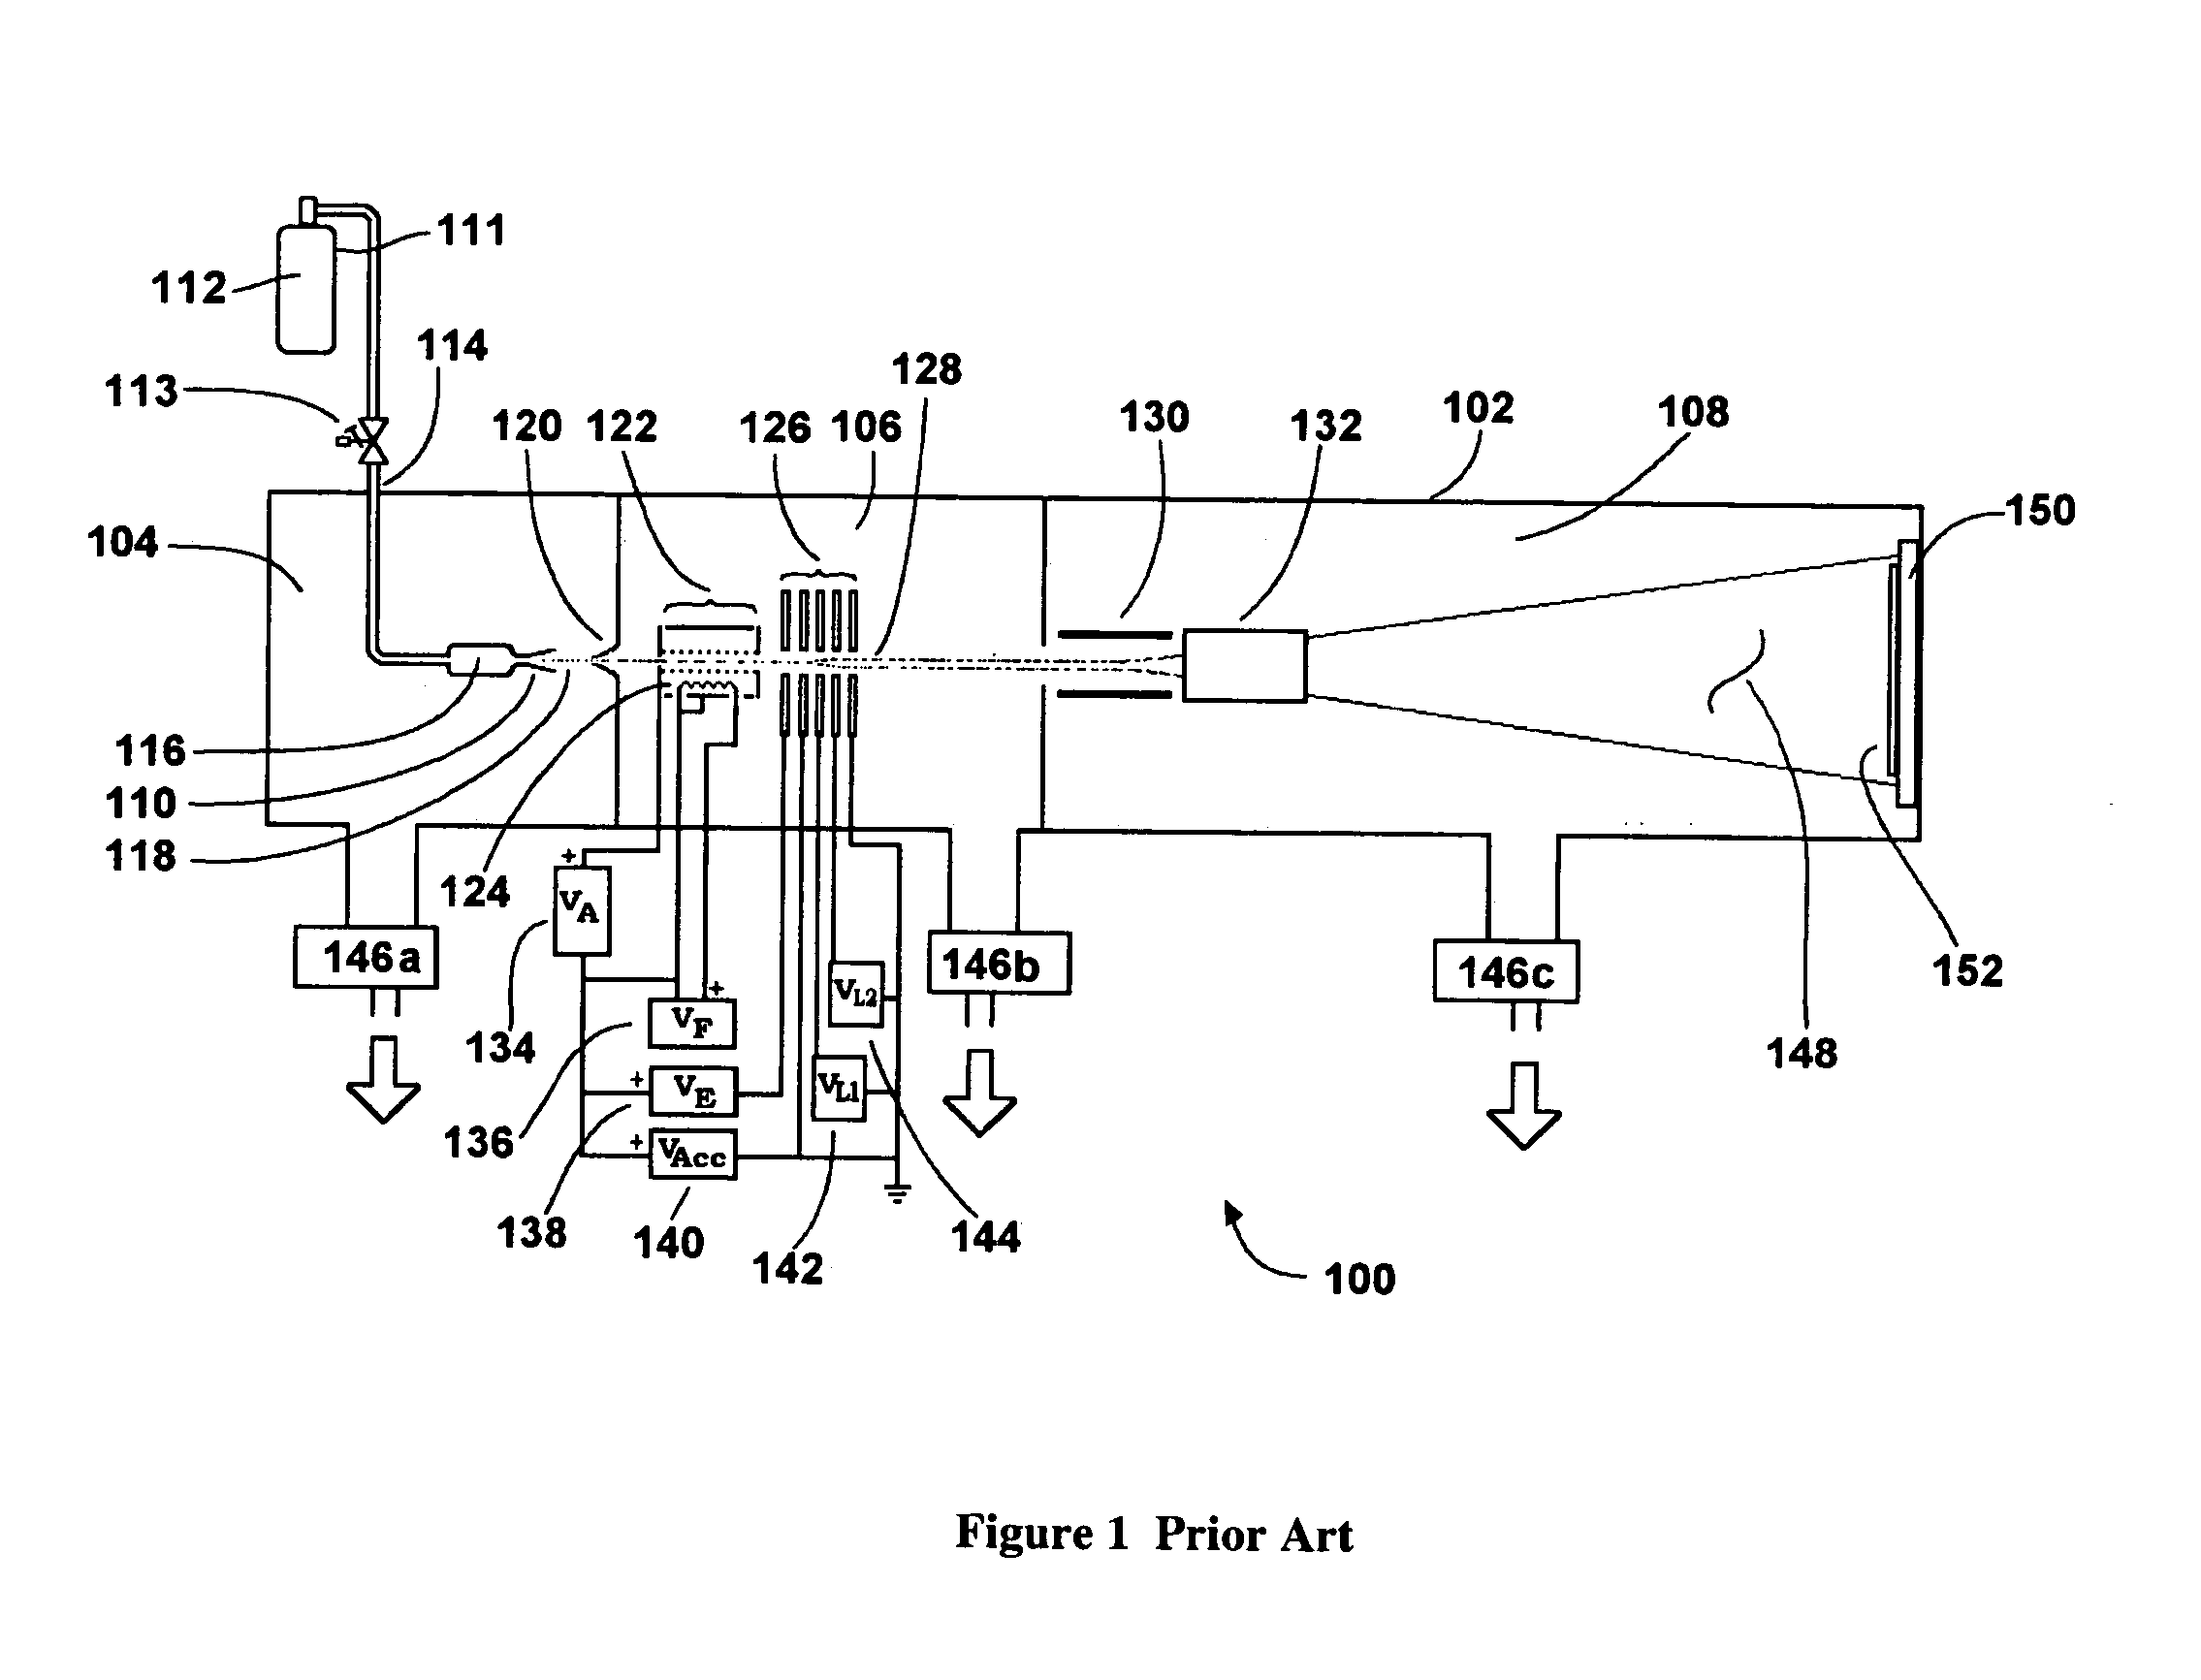 Replacement gate field effect transistor with germanium or SiGe channel and manufacturing method for same using gas-cluster ion irradiation